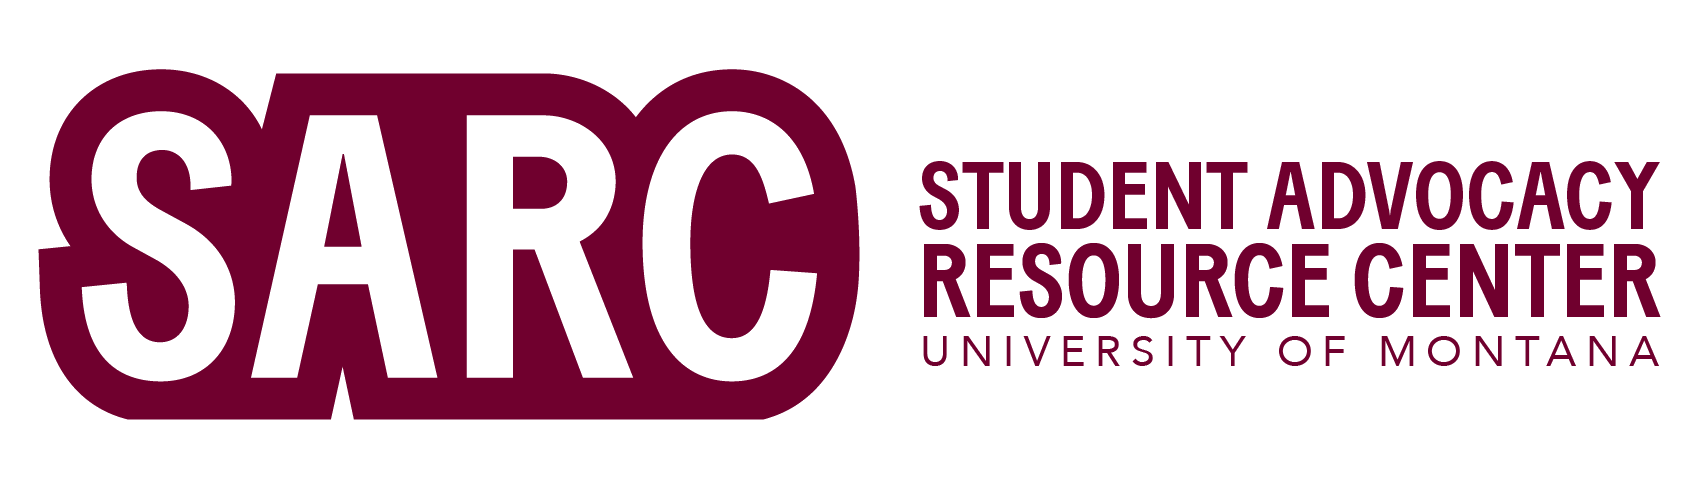 logo of the Student Advocacy Resource Center